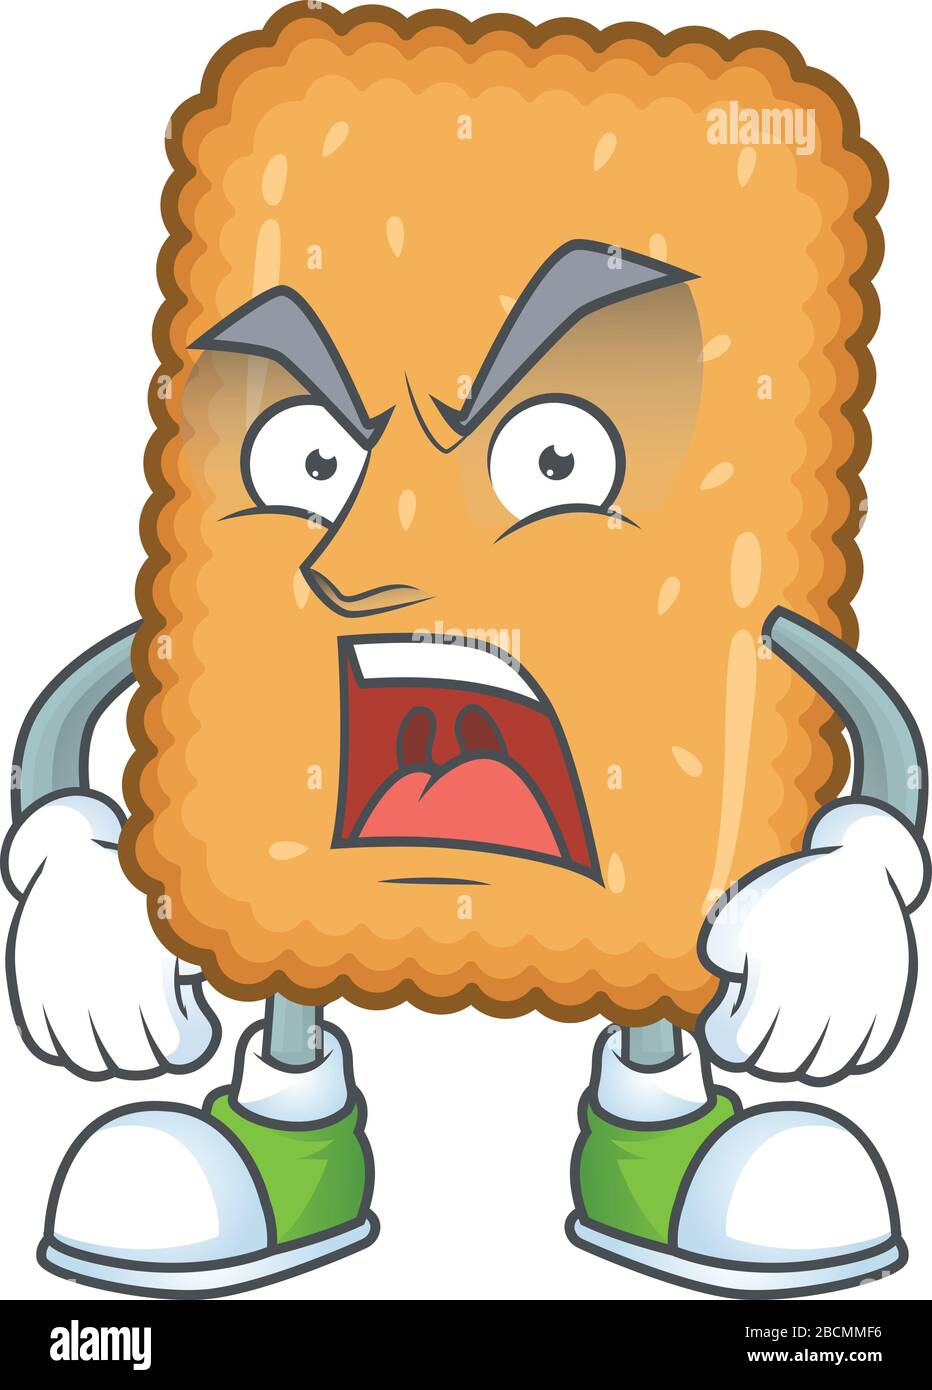 Biscuit cartoon character design with mad face Stock Vector